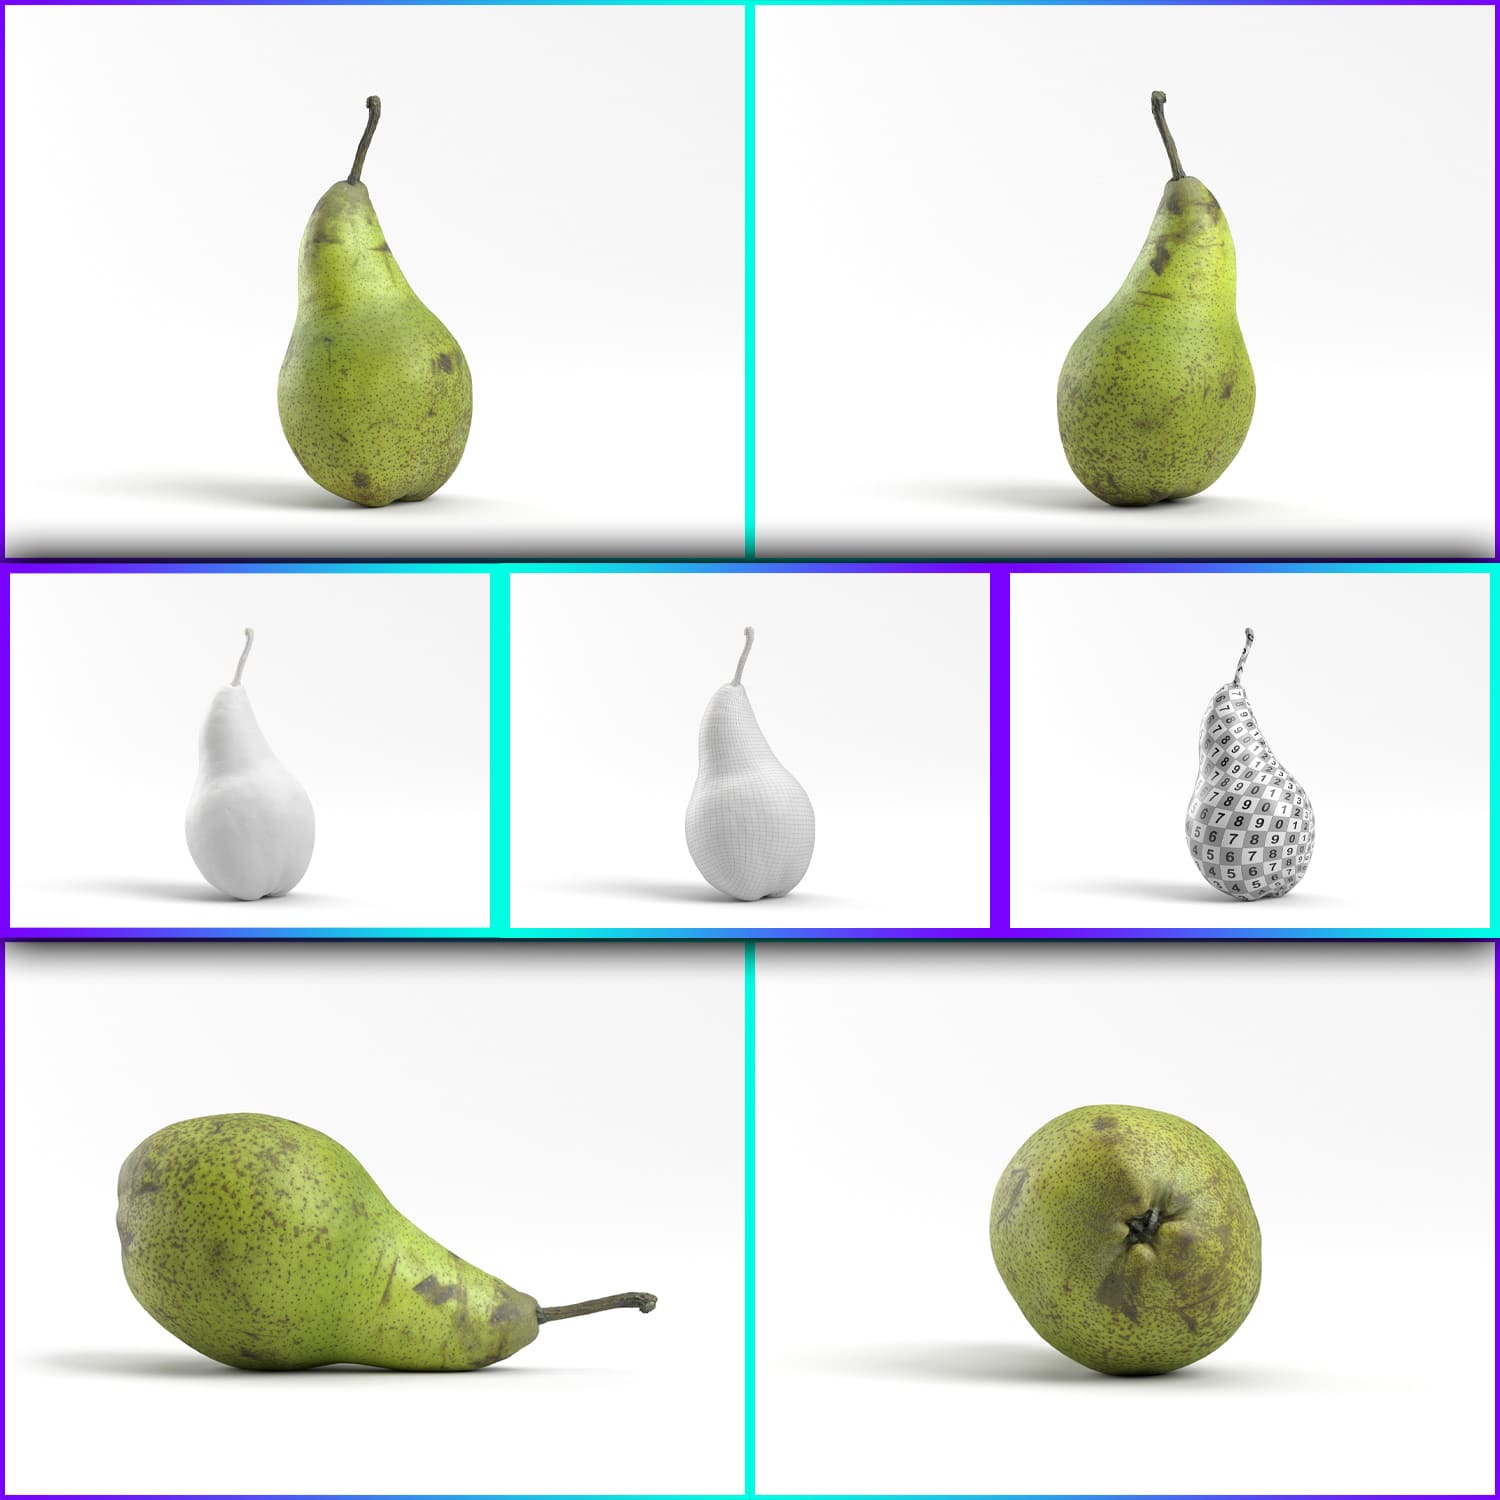 3D model of pears on a white background.